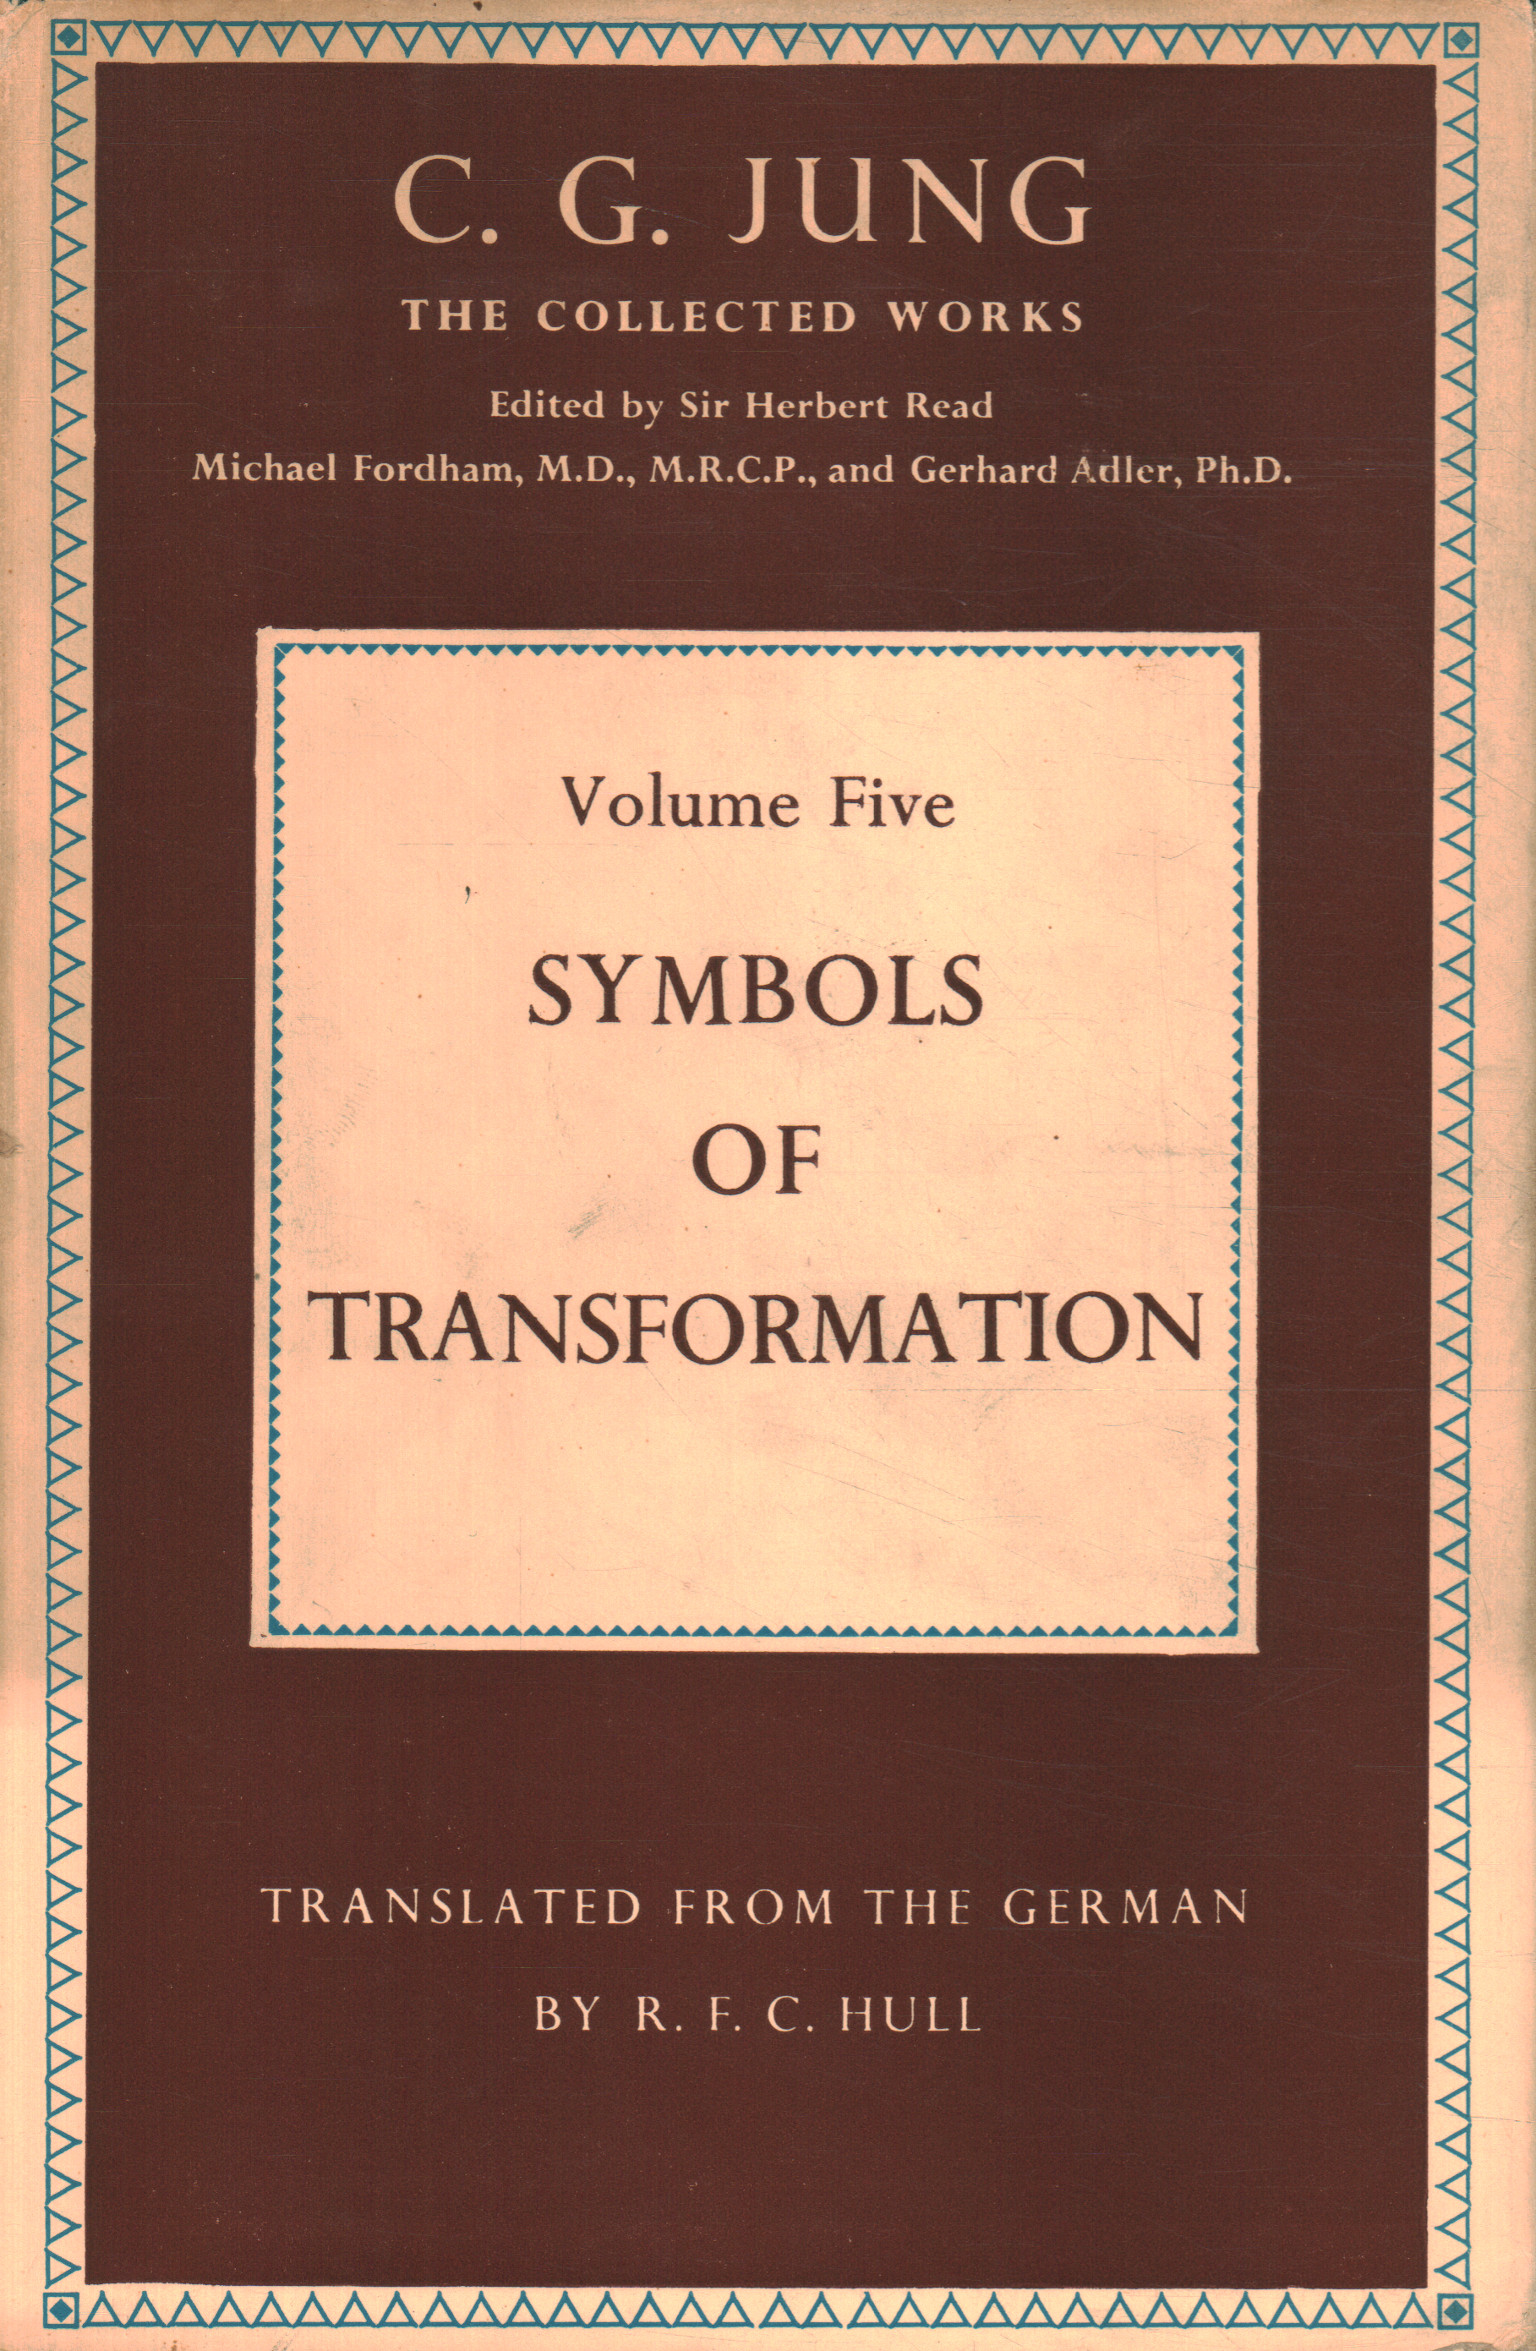 The collected works. Symbols of transfor